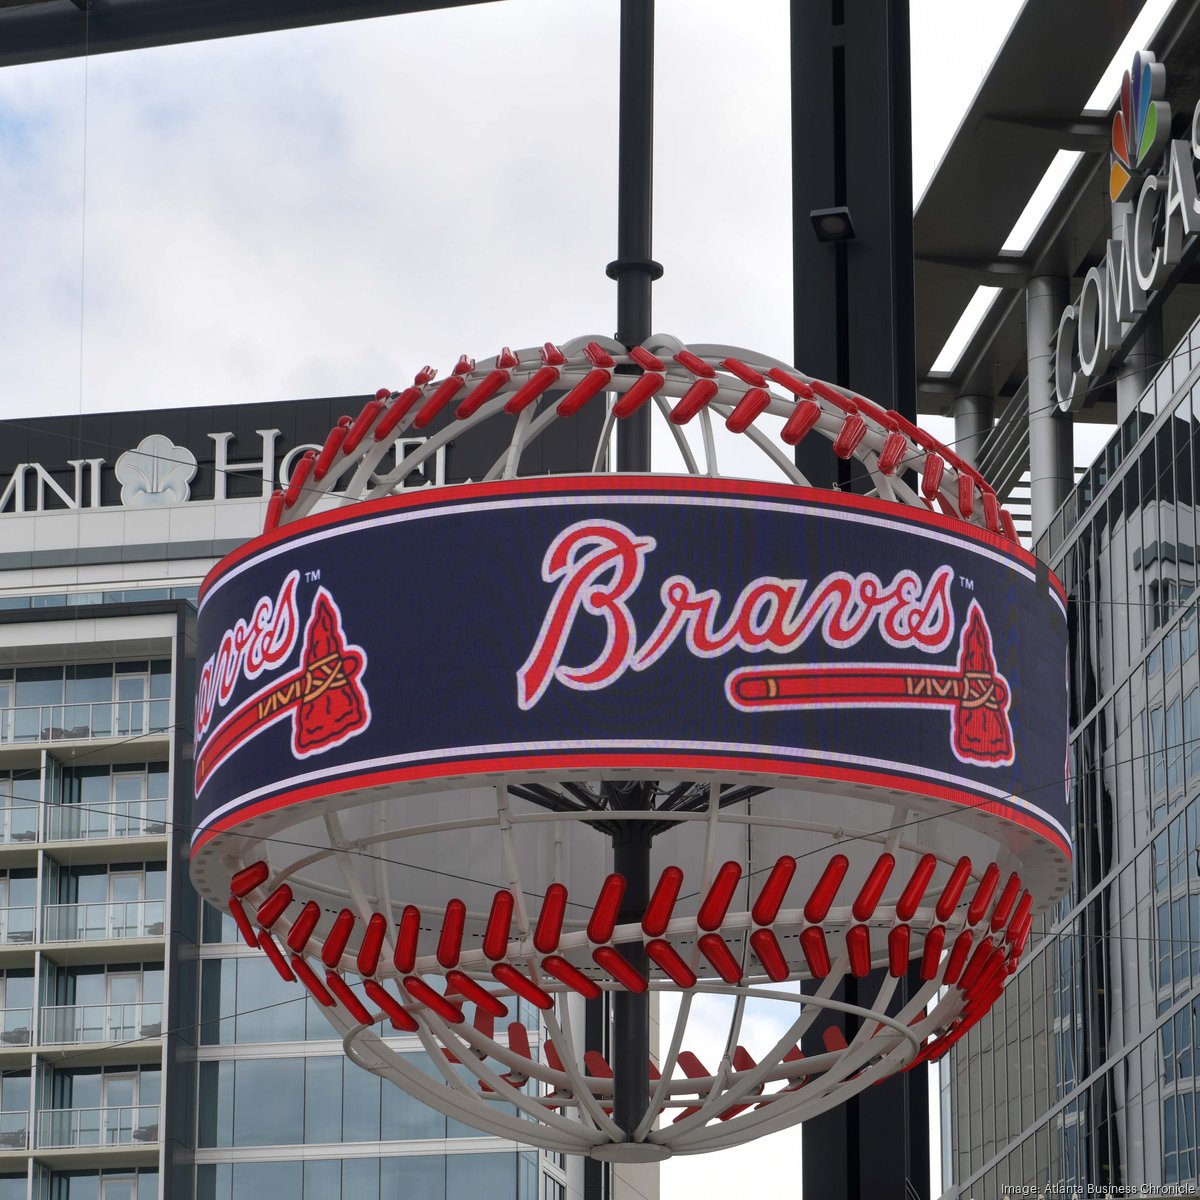 AMERICAN Provides 'Major League' Solutions for Atlanta Braves' New